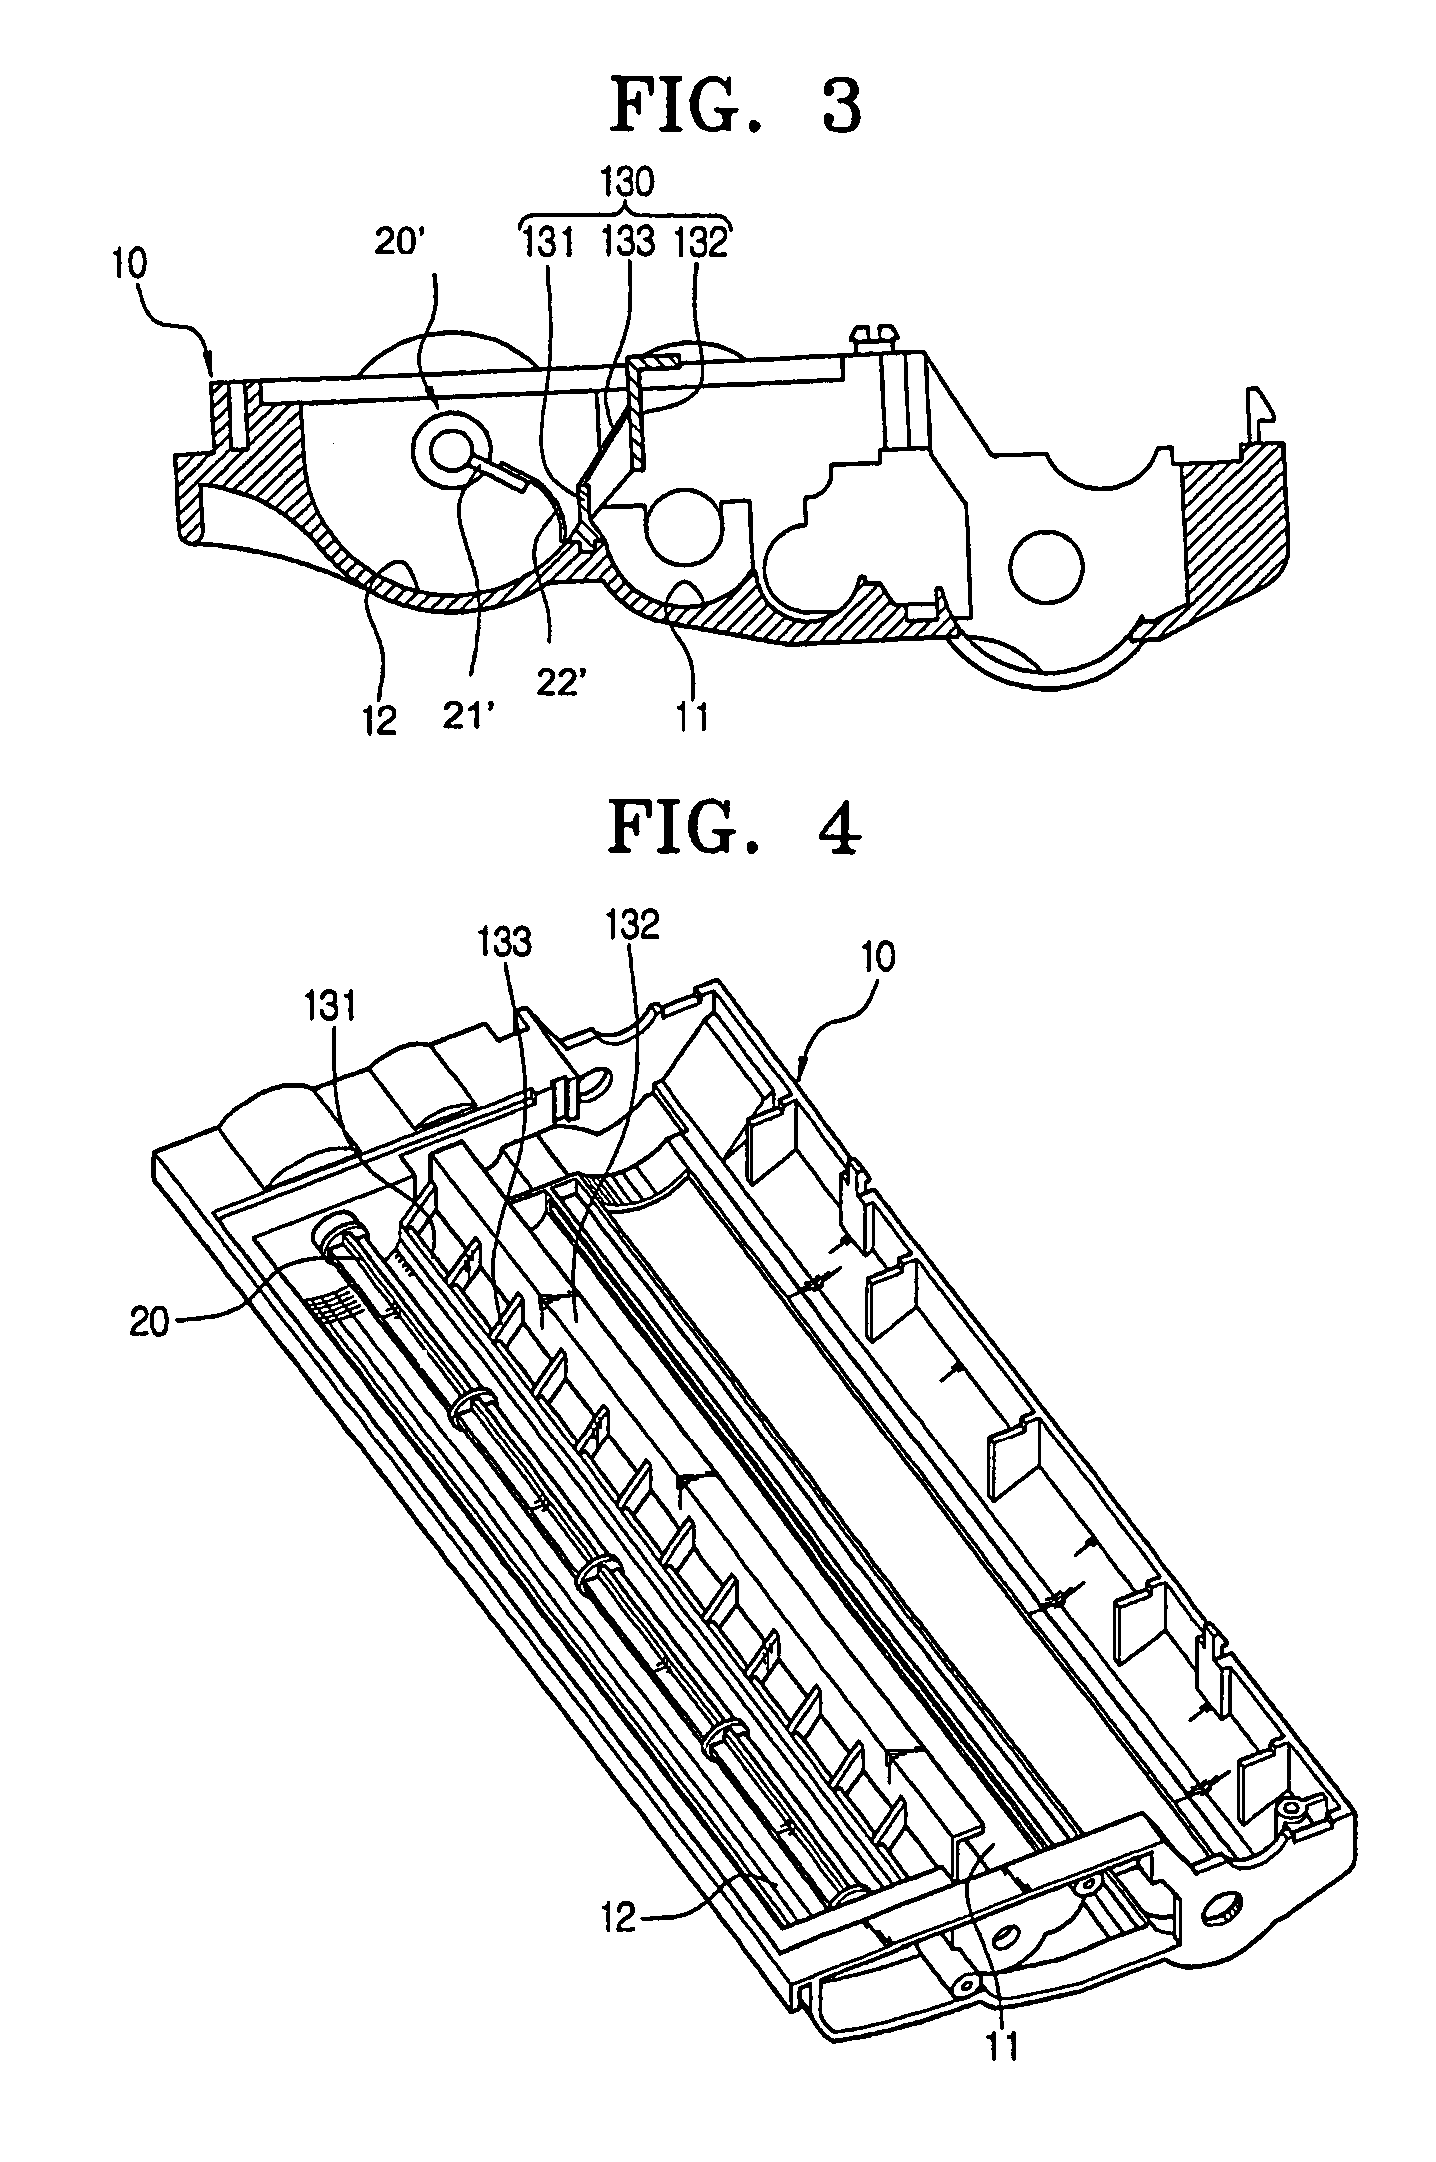 Developing unit for image forming apparatus